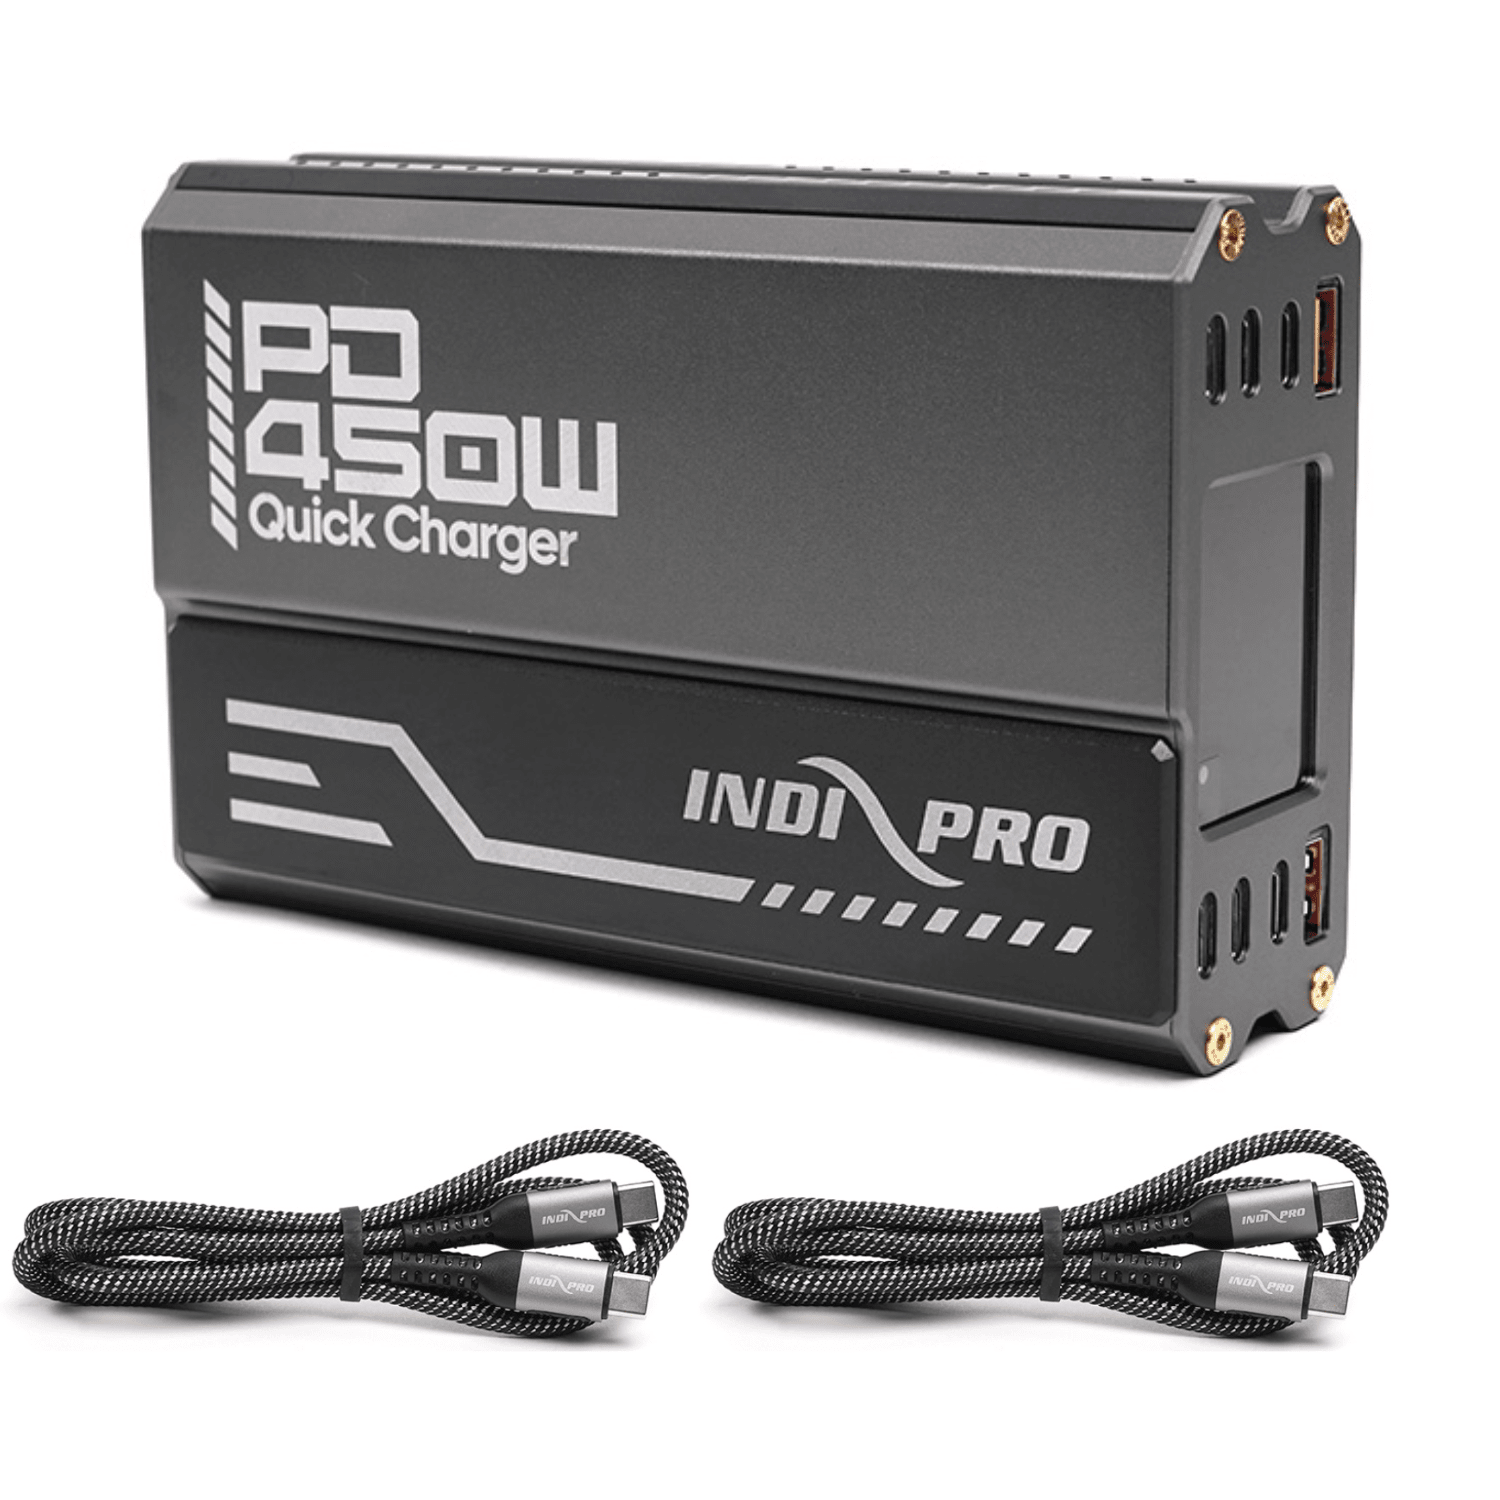 Indipro PD450Wh Intelligent Fast Charging Box & 2x Type-C USB to Type-C USB Cables (40") Kit Charging Adapter & Power Supply Indipro Tools 